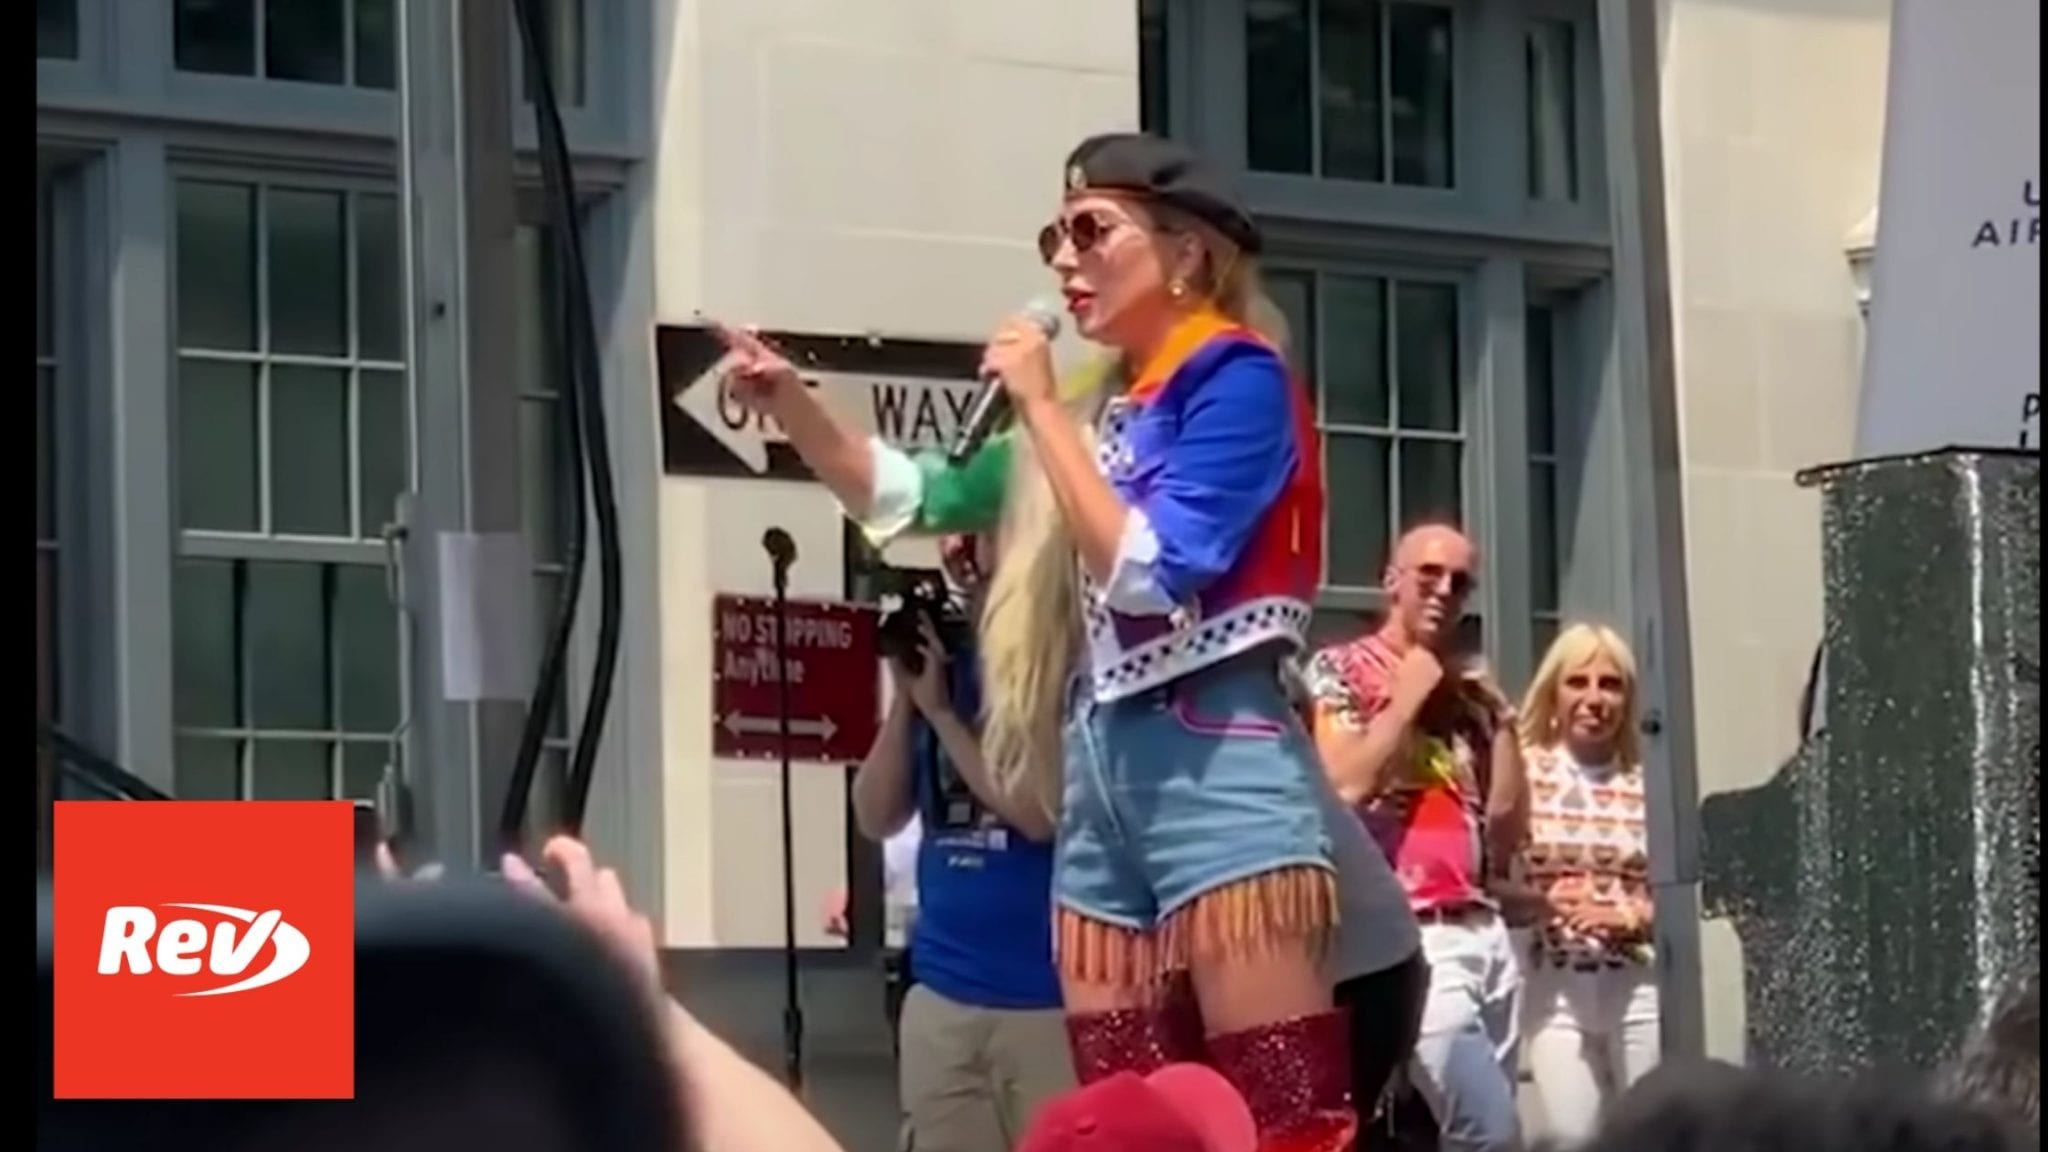 Lady Gaga Stonewall Day Speech Transcript 2019: "I Would Take a Bullet for You"